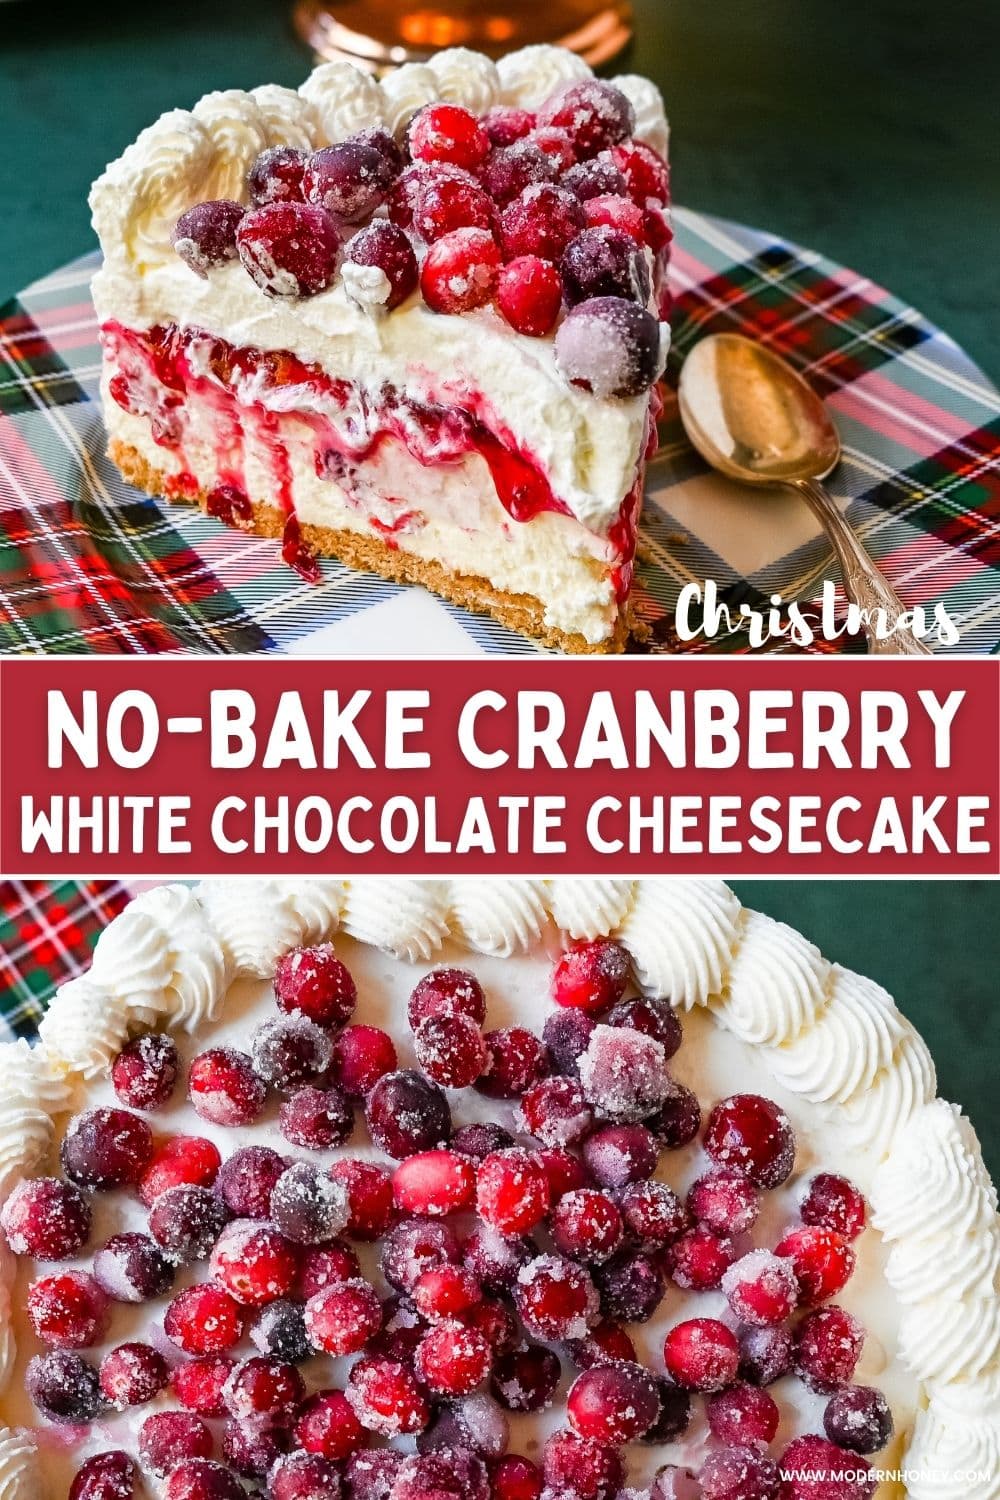 Christmas No-Bake Cranberry White Chocolate Cheesecake. This is a beautiful Christmas Cranberry Cheesecake perfect for the holidays. This no-bake white chocolate cheesecake has a graham cracker crust, white chocolate cream cheese filling, topped with homemade cranberry jam, sugared cranberries, and whipped cream.